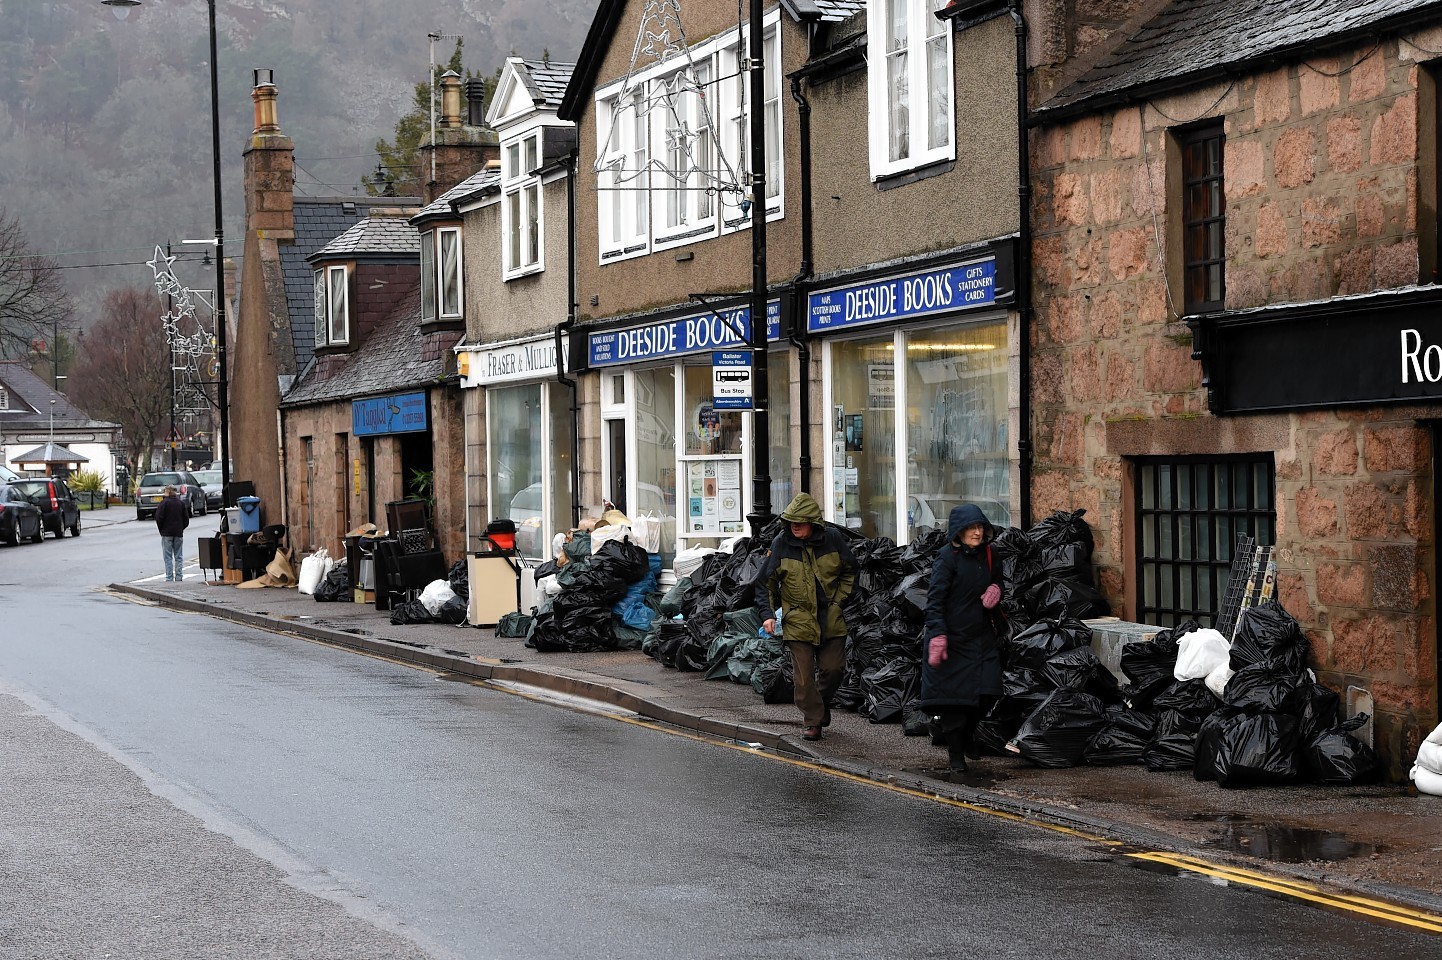 Aberdeenshire Council chief executive Jim Savege visited Ballater to see the huge clean-up